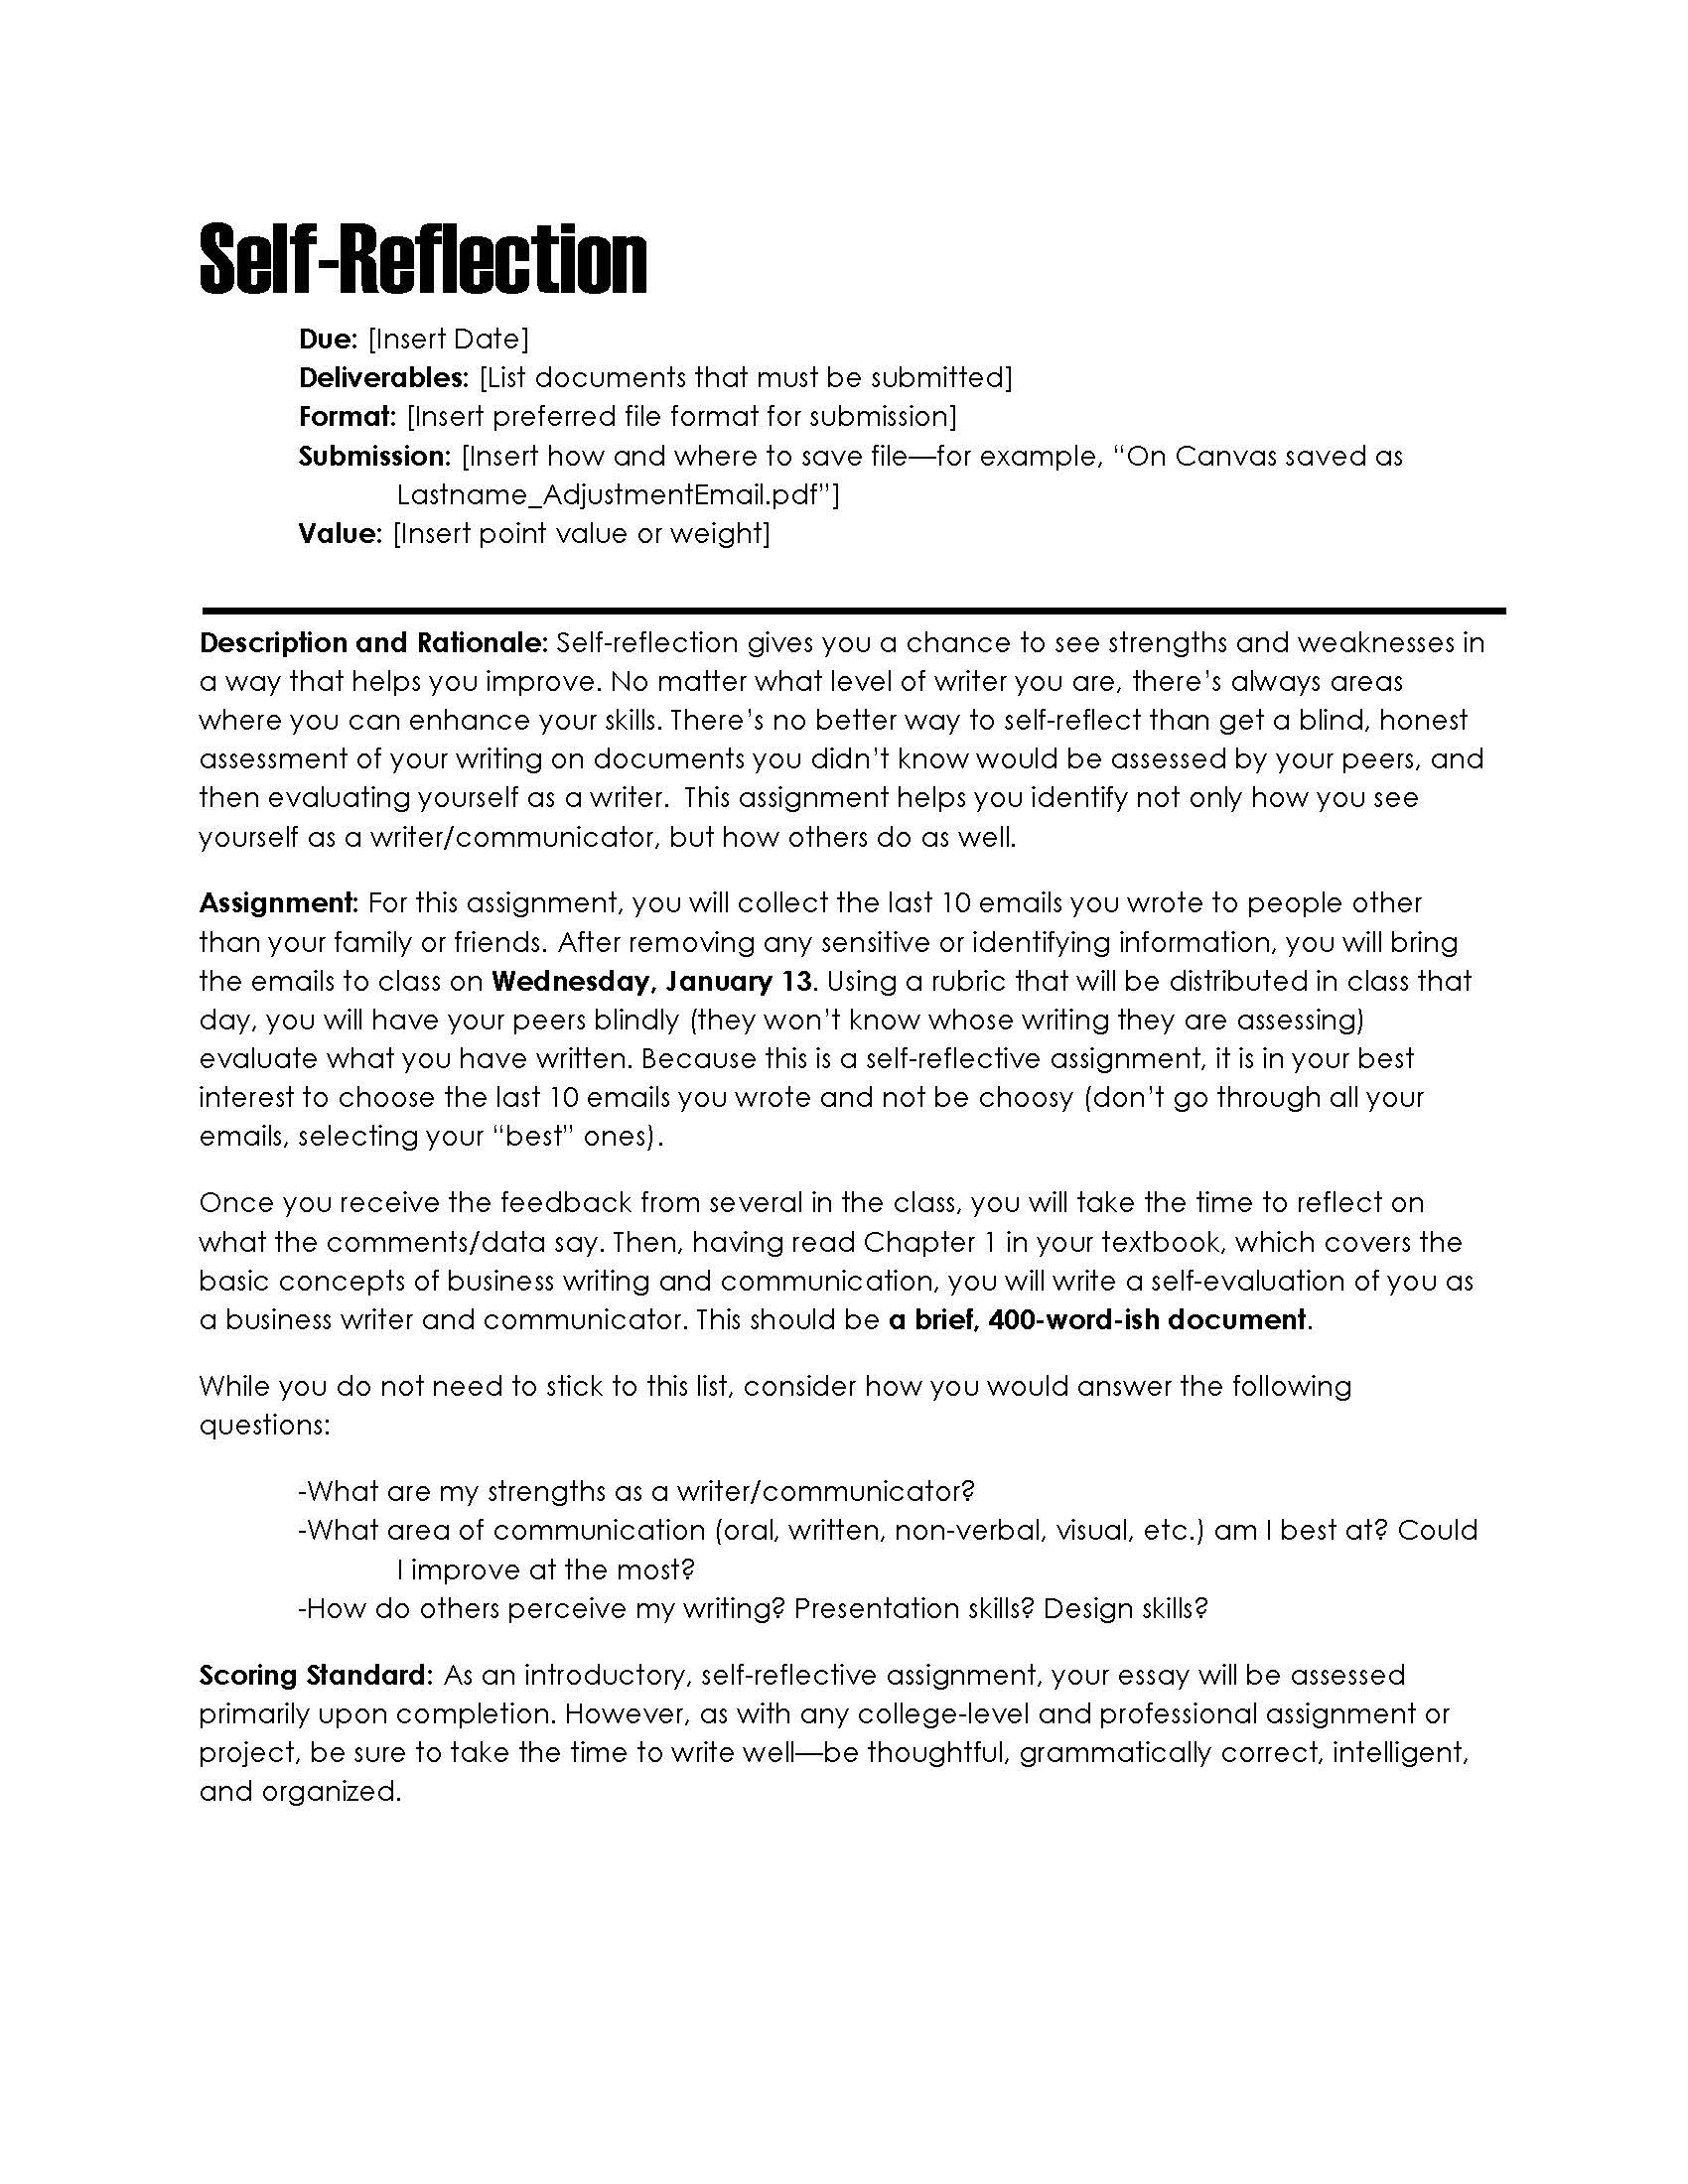 how to make a self reflection essay